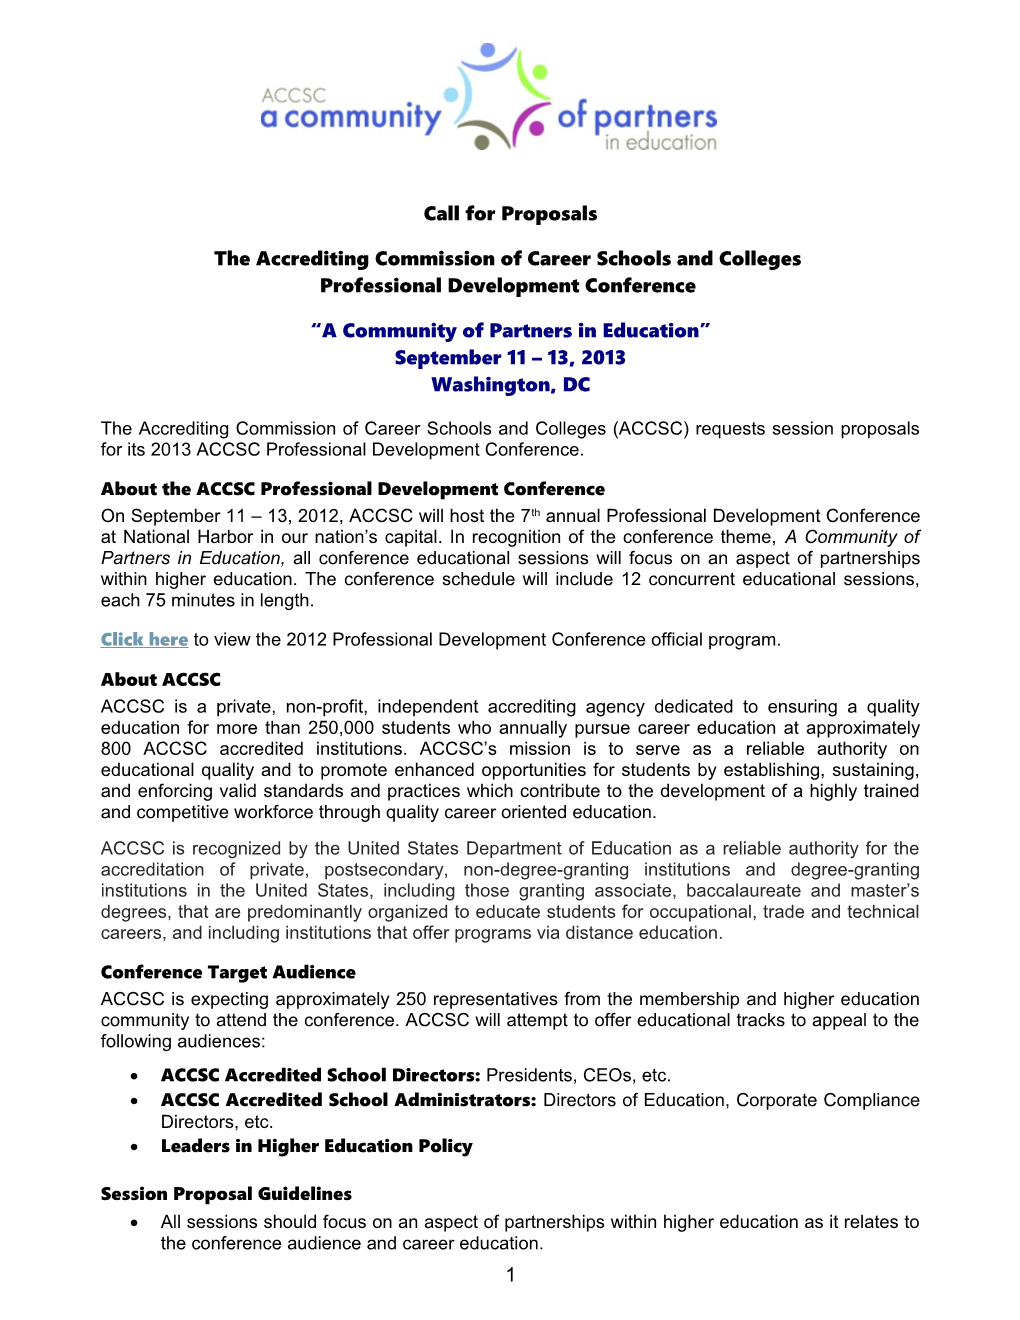 The Accrediting Commission of Career Schools and Colleges